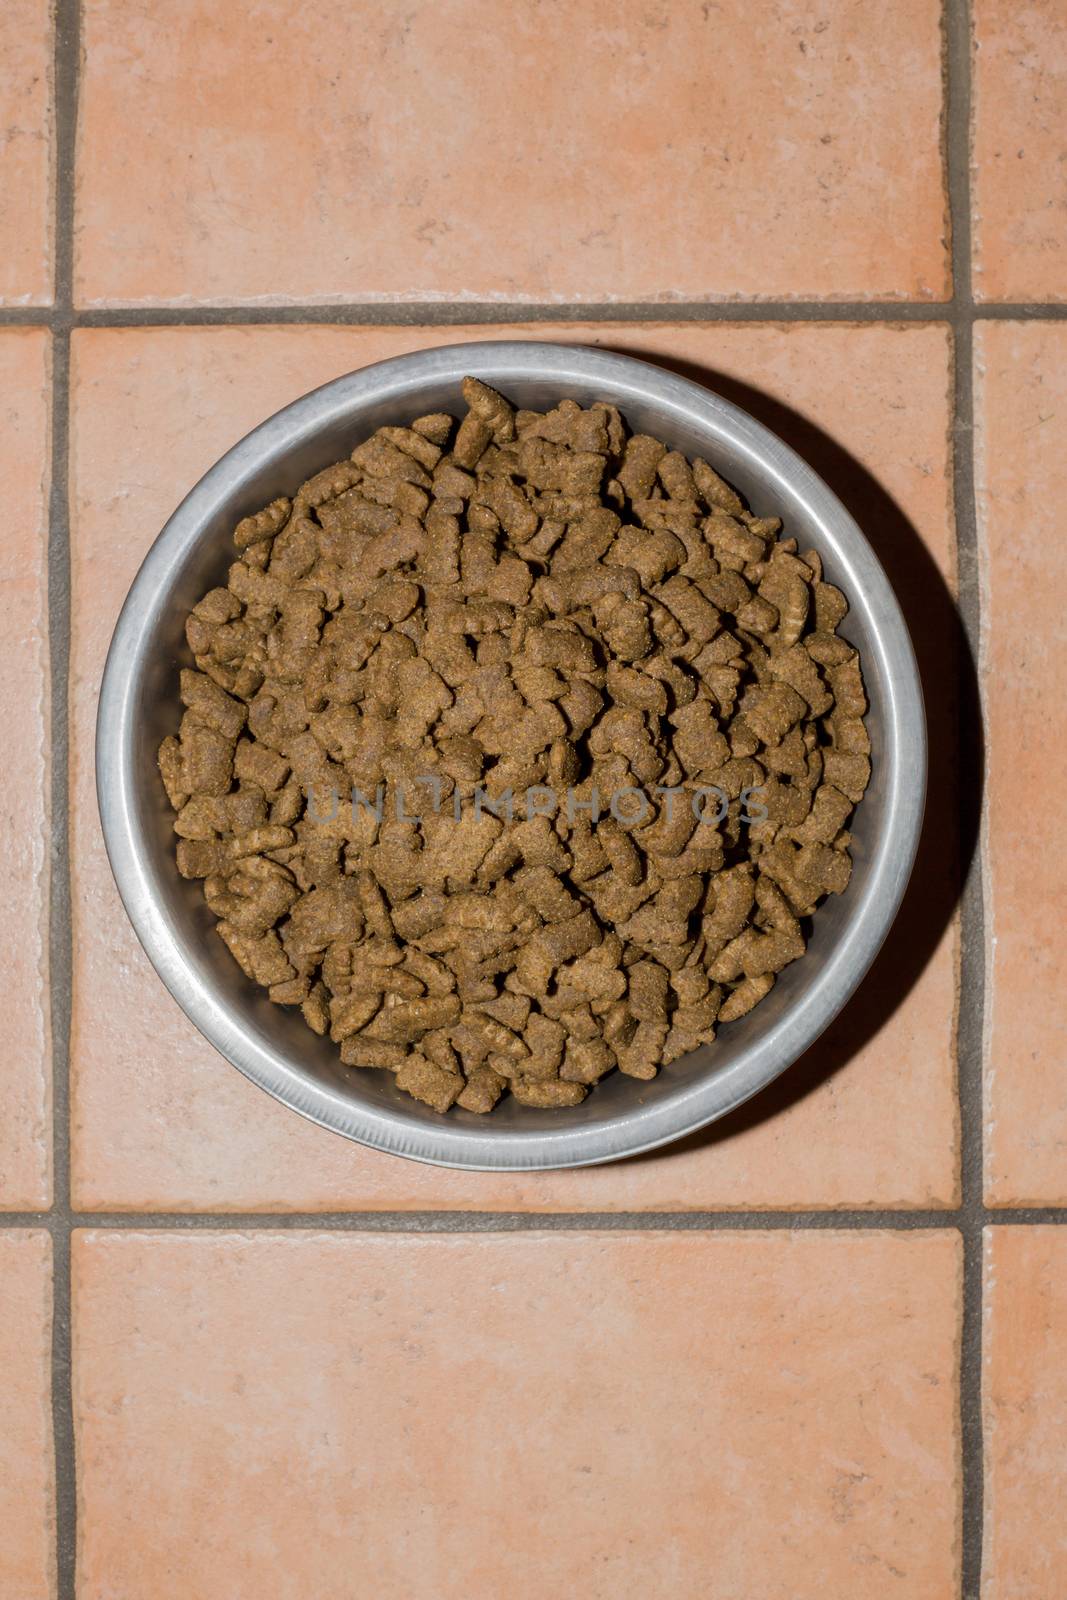 Bowl made of stainless steel with dog food by sandra_fotodesign